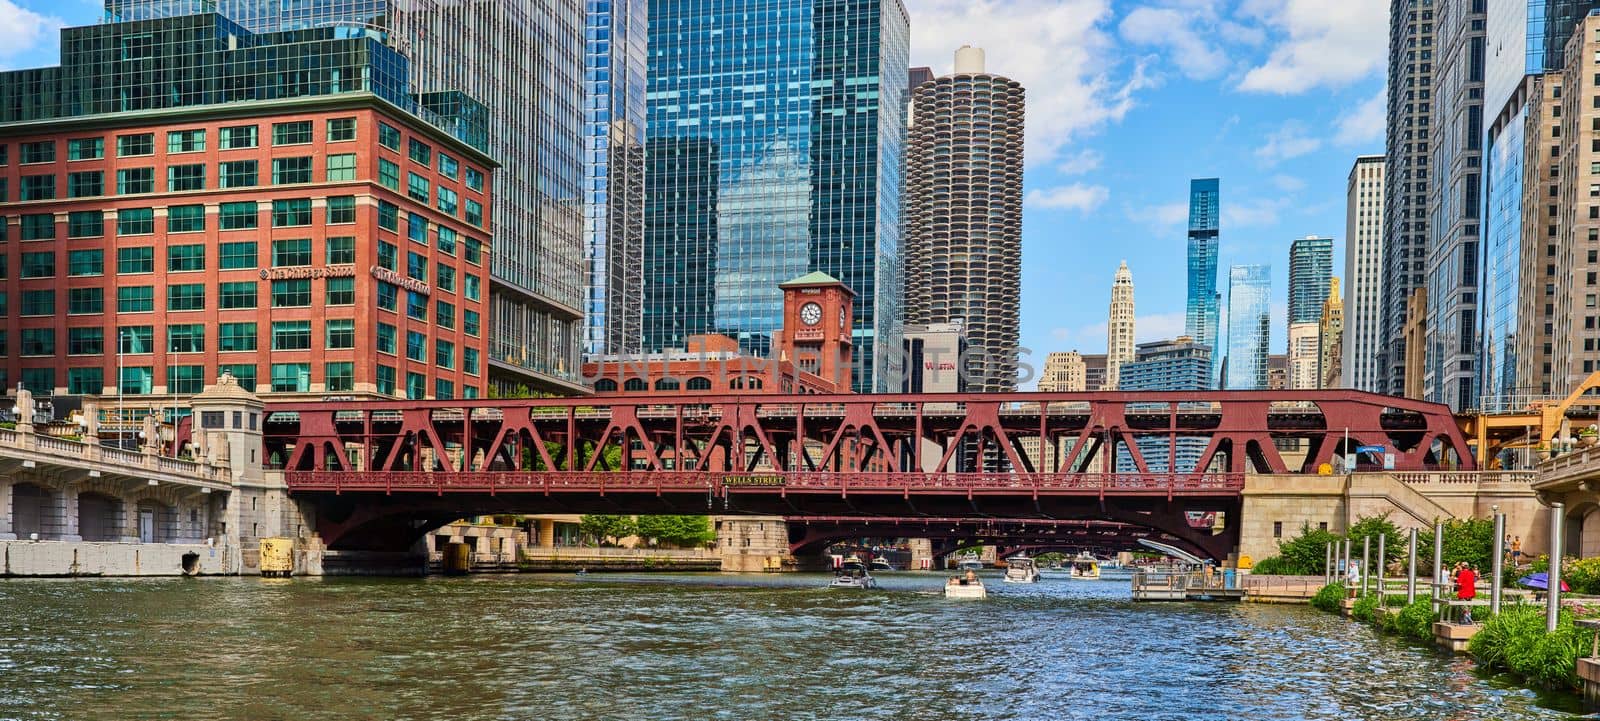 Wells Street bridge going over river in Chicago with skyscrapers all around by njproductions